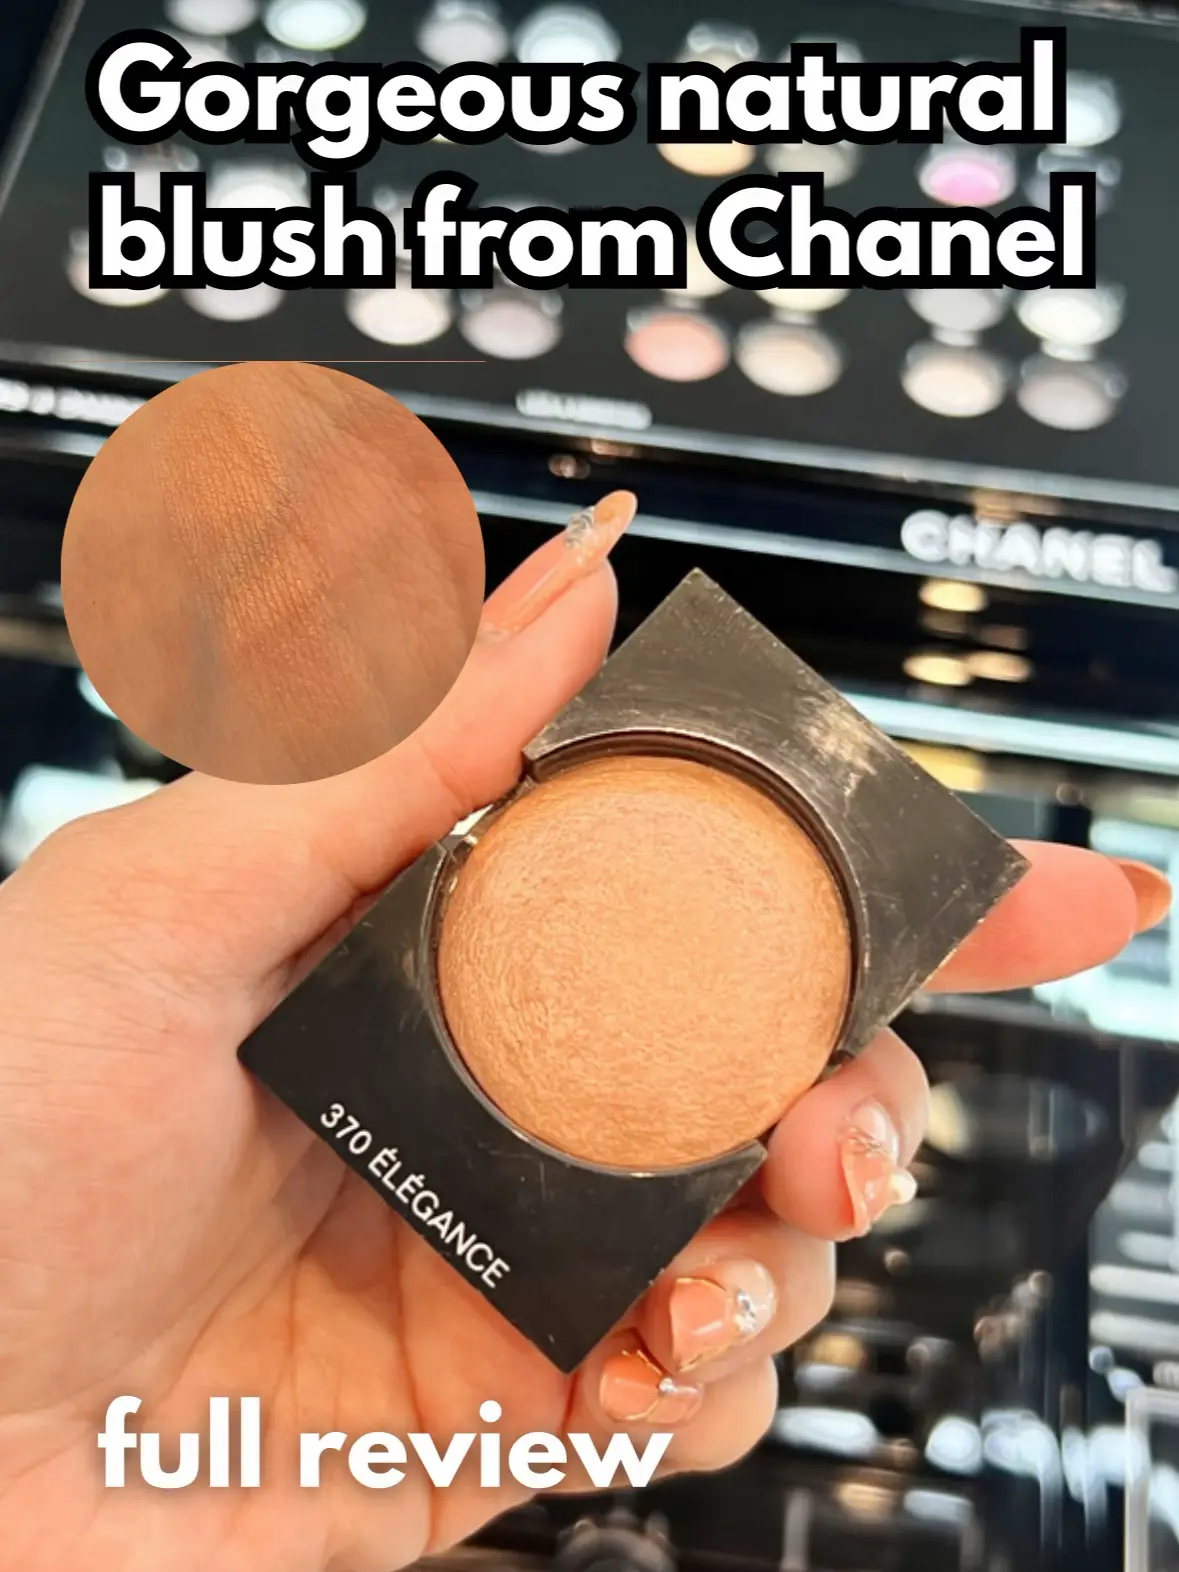 This is a gorgeous natural blush chanel🥰, Gallery posted by Geeeyaa